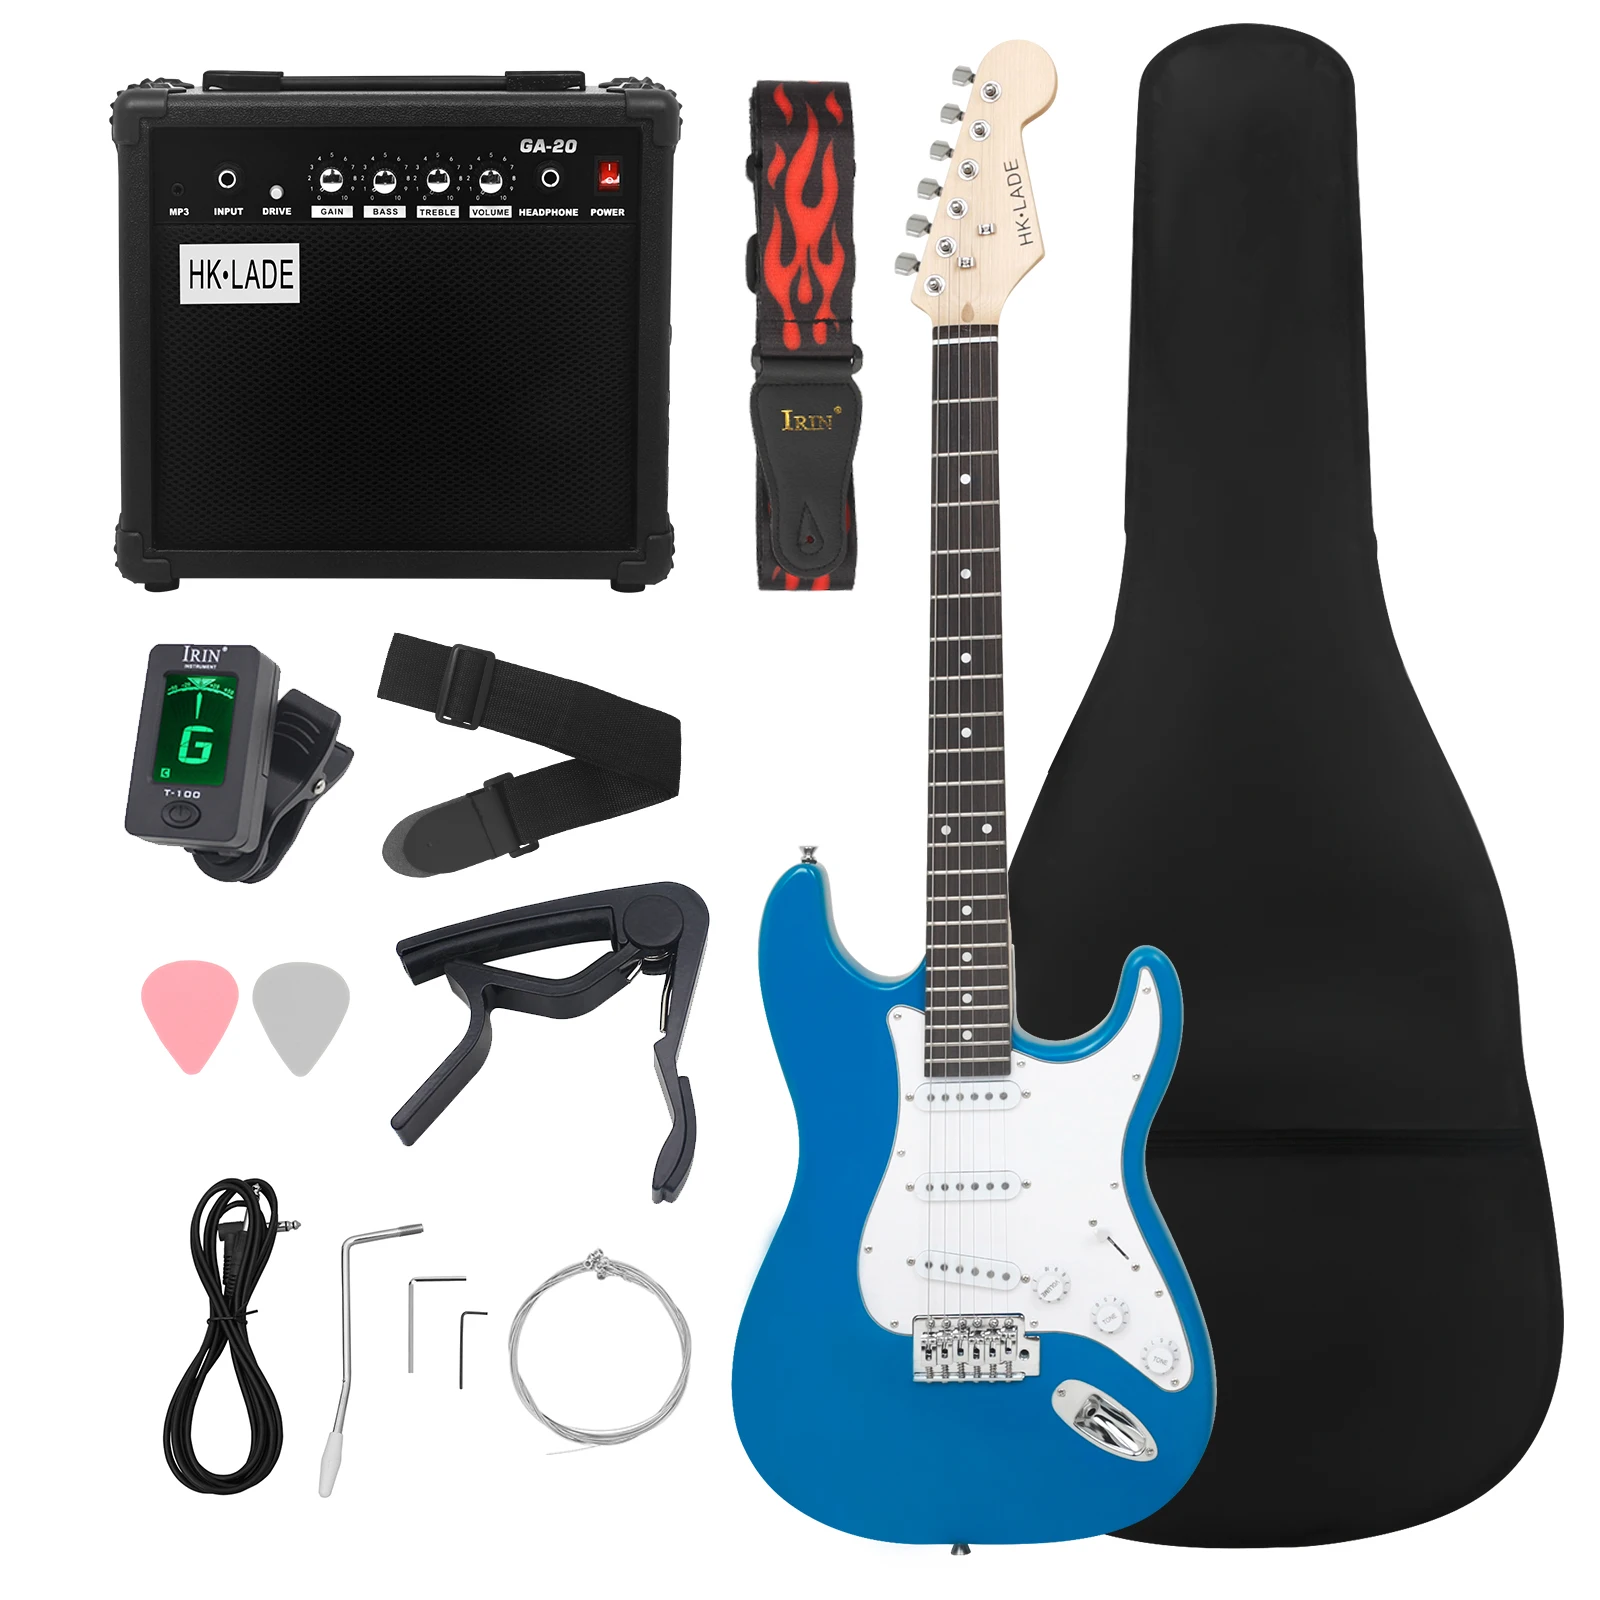 

6 Strings Electric Guitar 39 Inch 22 Frets Maple Body Electric Guitarra With Bag Amp Strap Picks Guitar Parts & Accessories